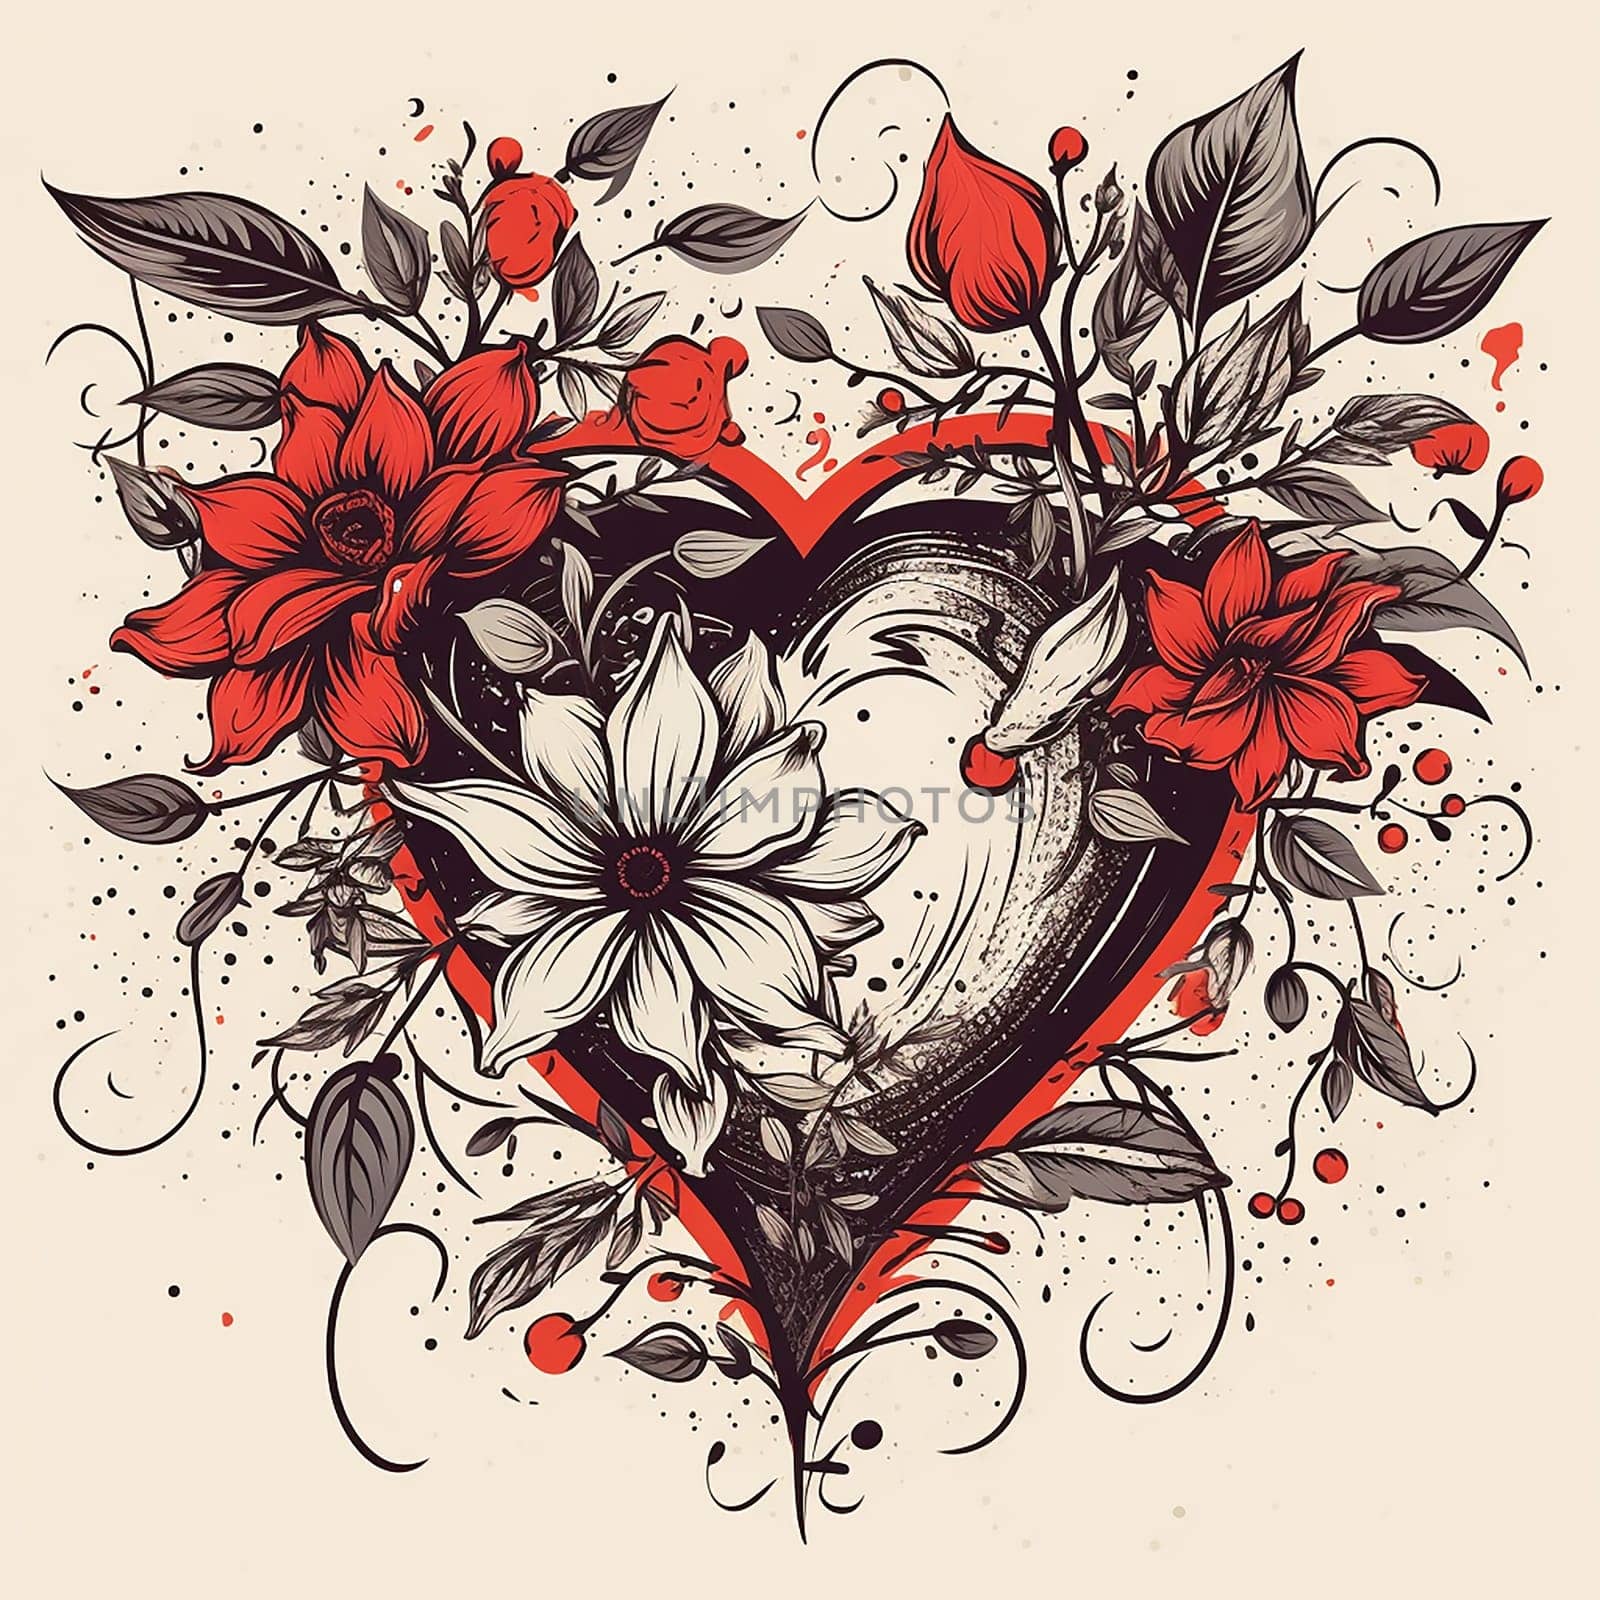 Illustration of a heart surrounded by flowers and leaves with splashes of color. by Hype2art